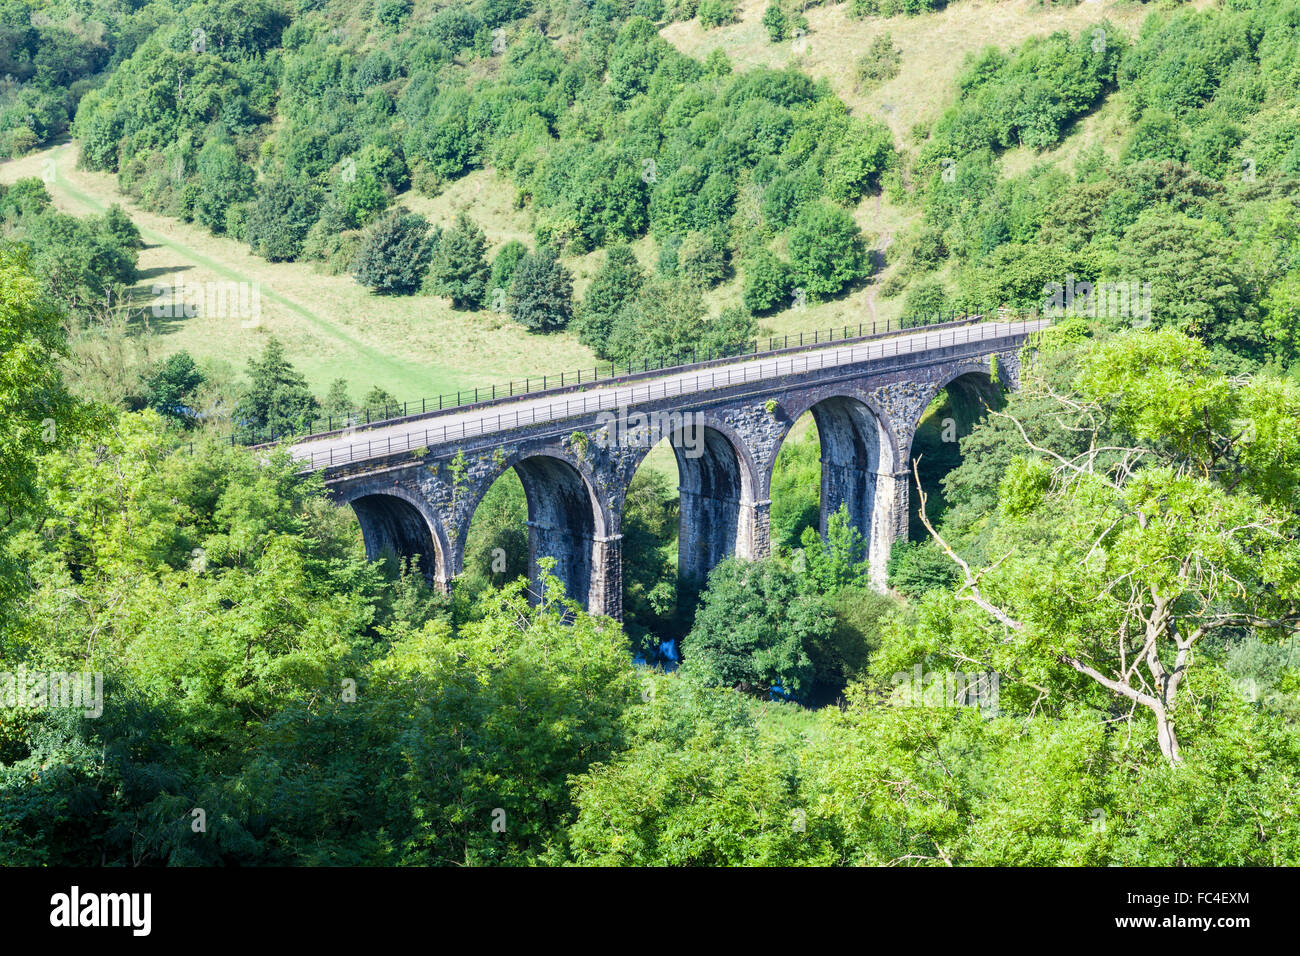 The Headstone Viaduct over Monsal Dale seen from Monsal Head, Derbyshire, Peak District, England, UK Stock Photo